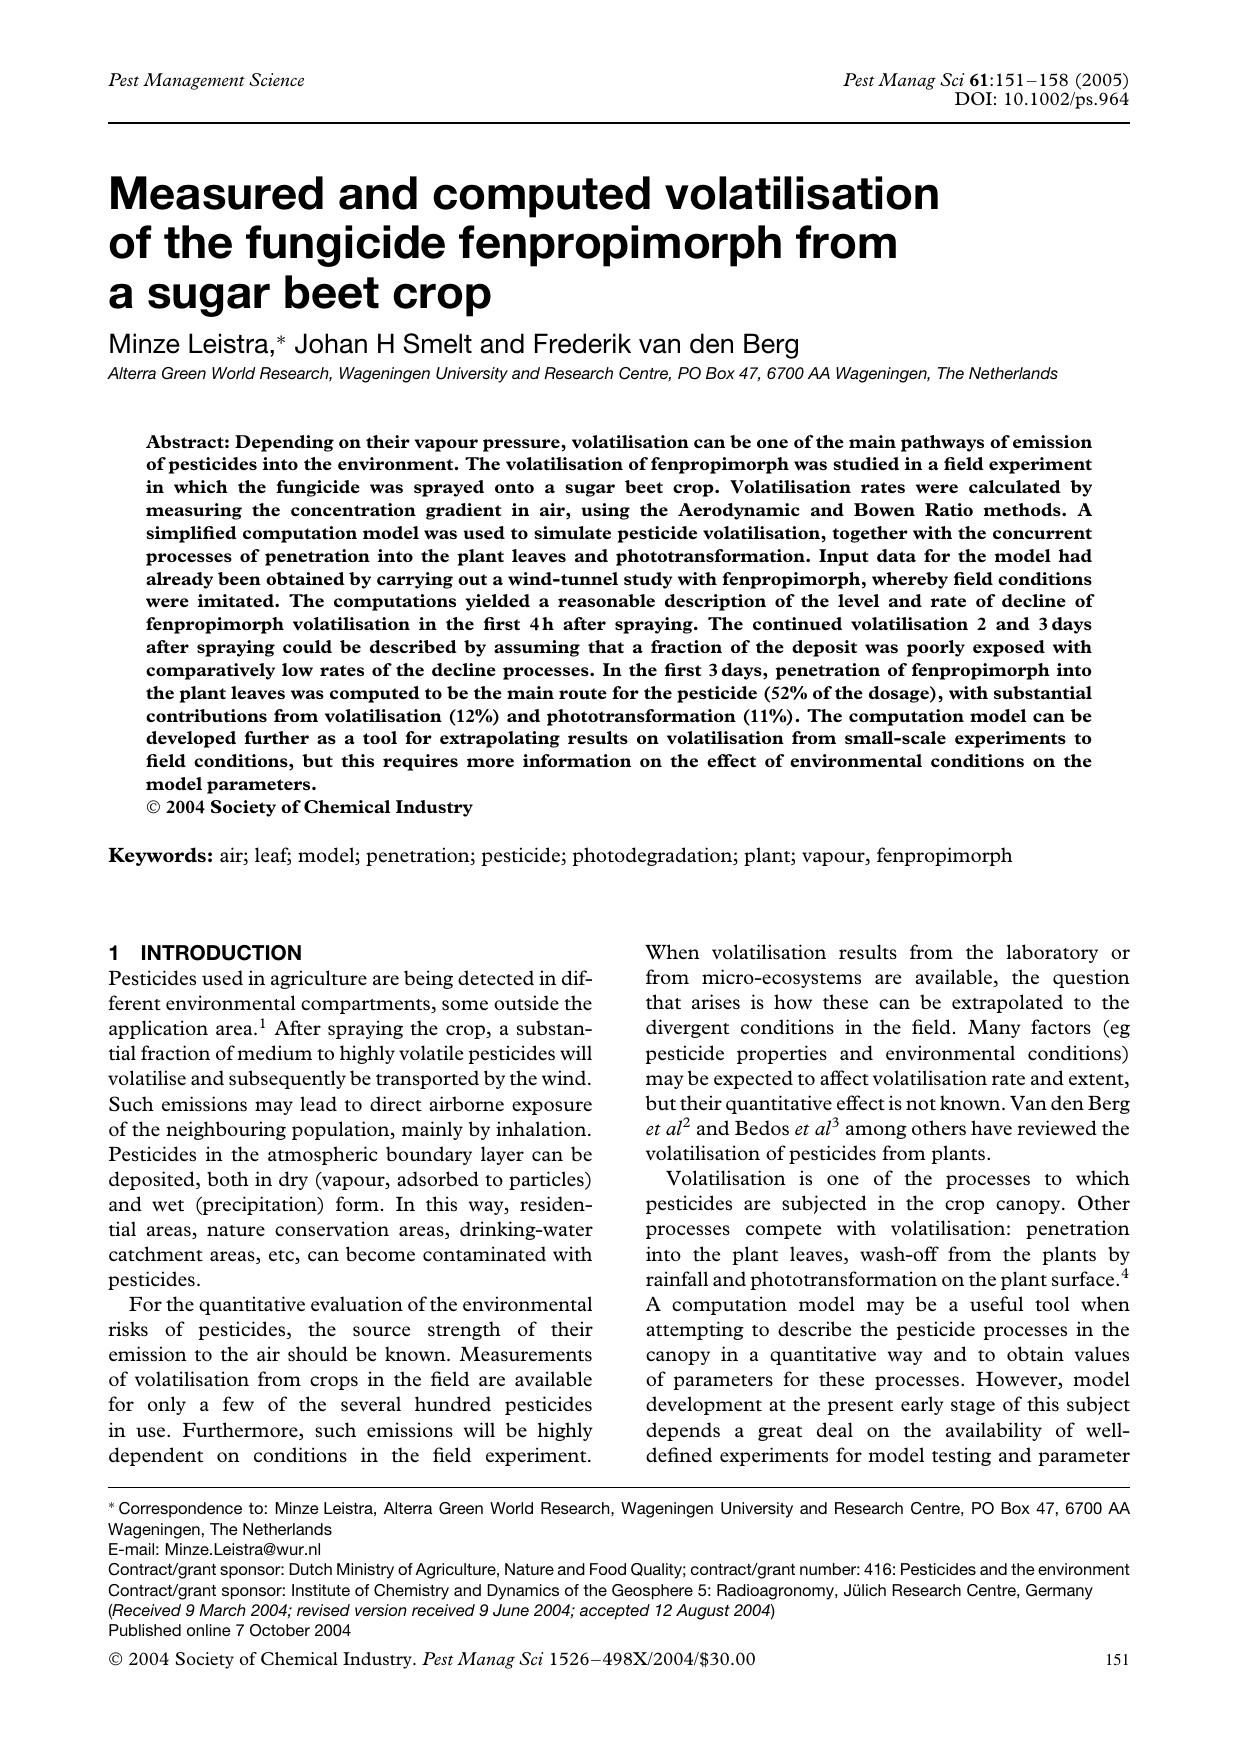 Measured and computed volatilisation of the fungicide fenpropimorph from a sugar beet crop by Unknown